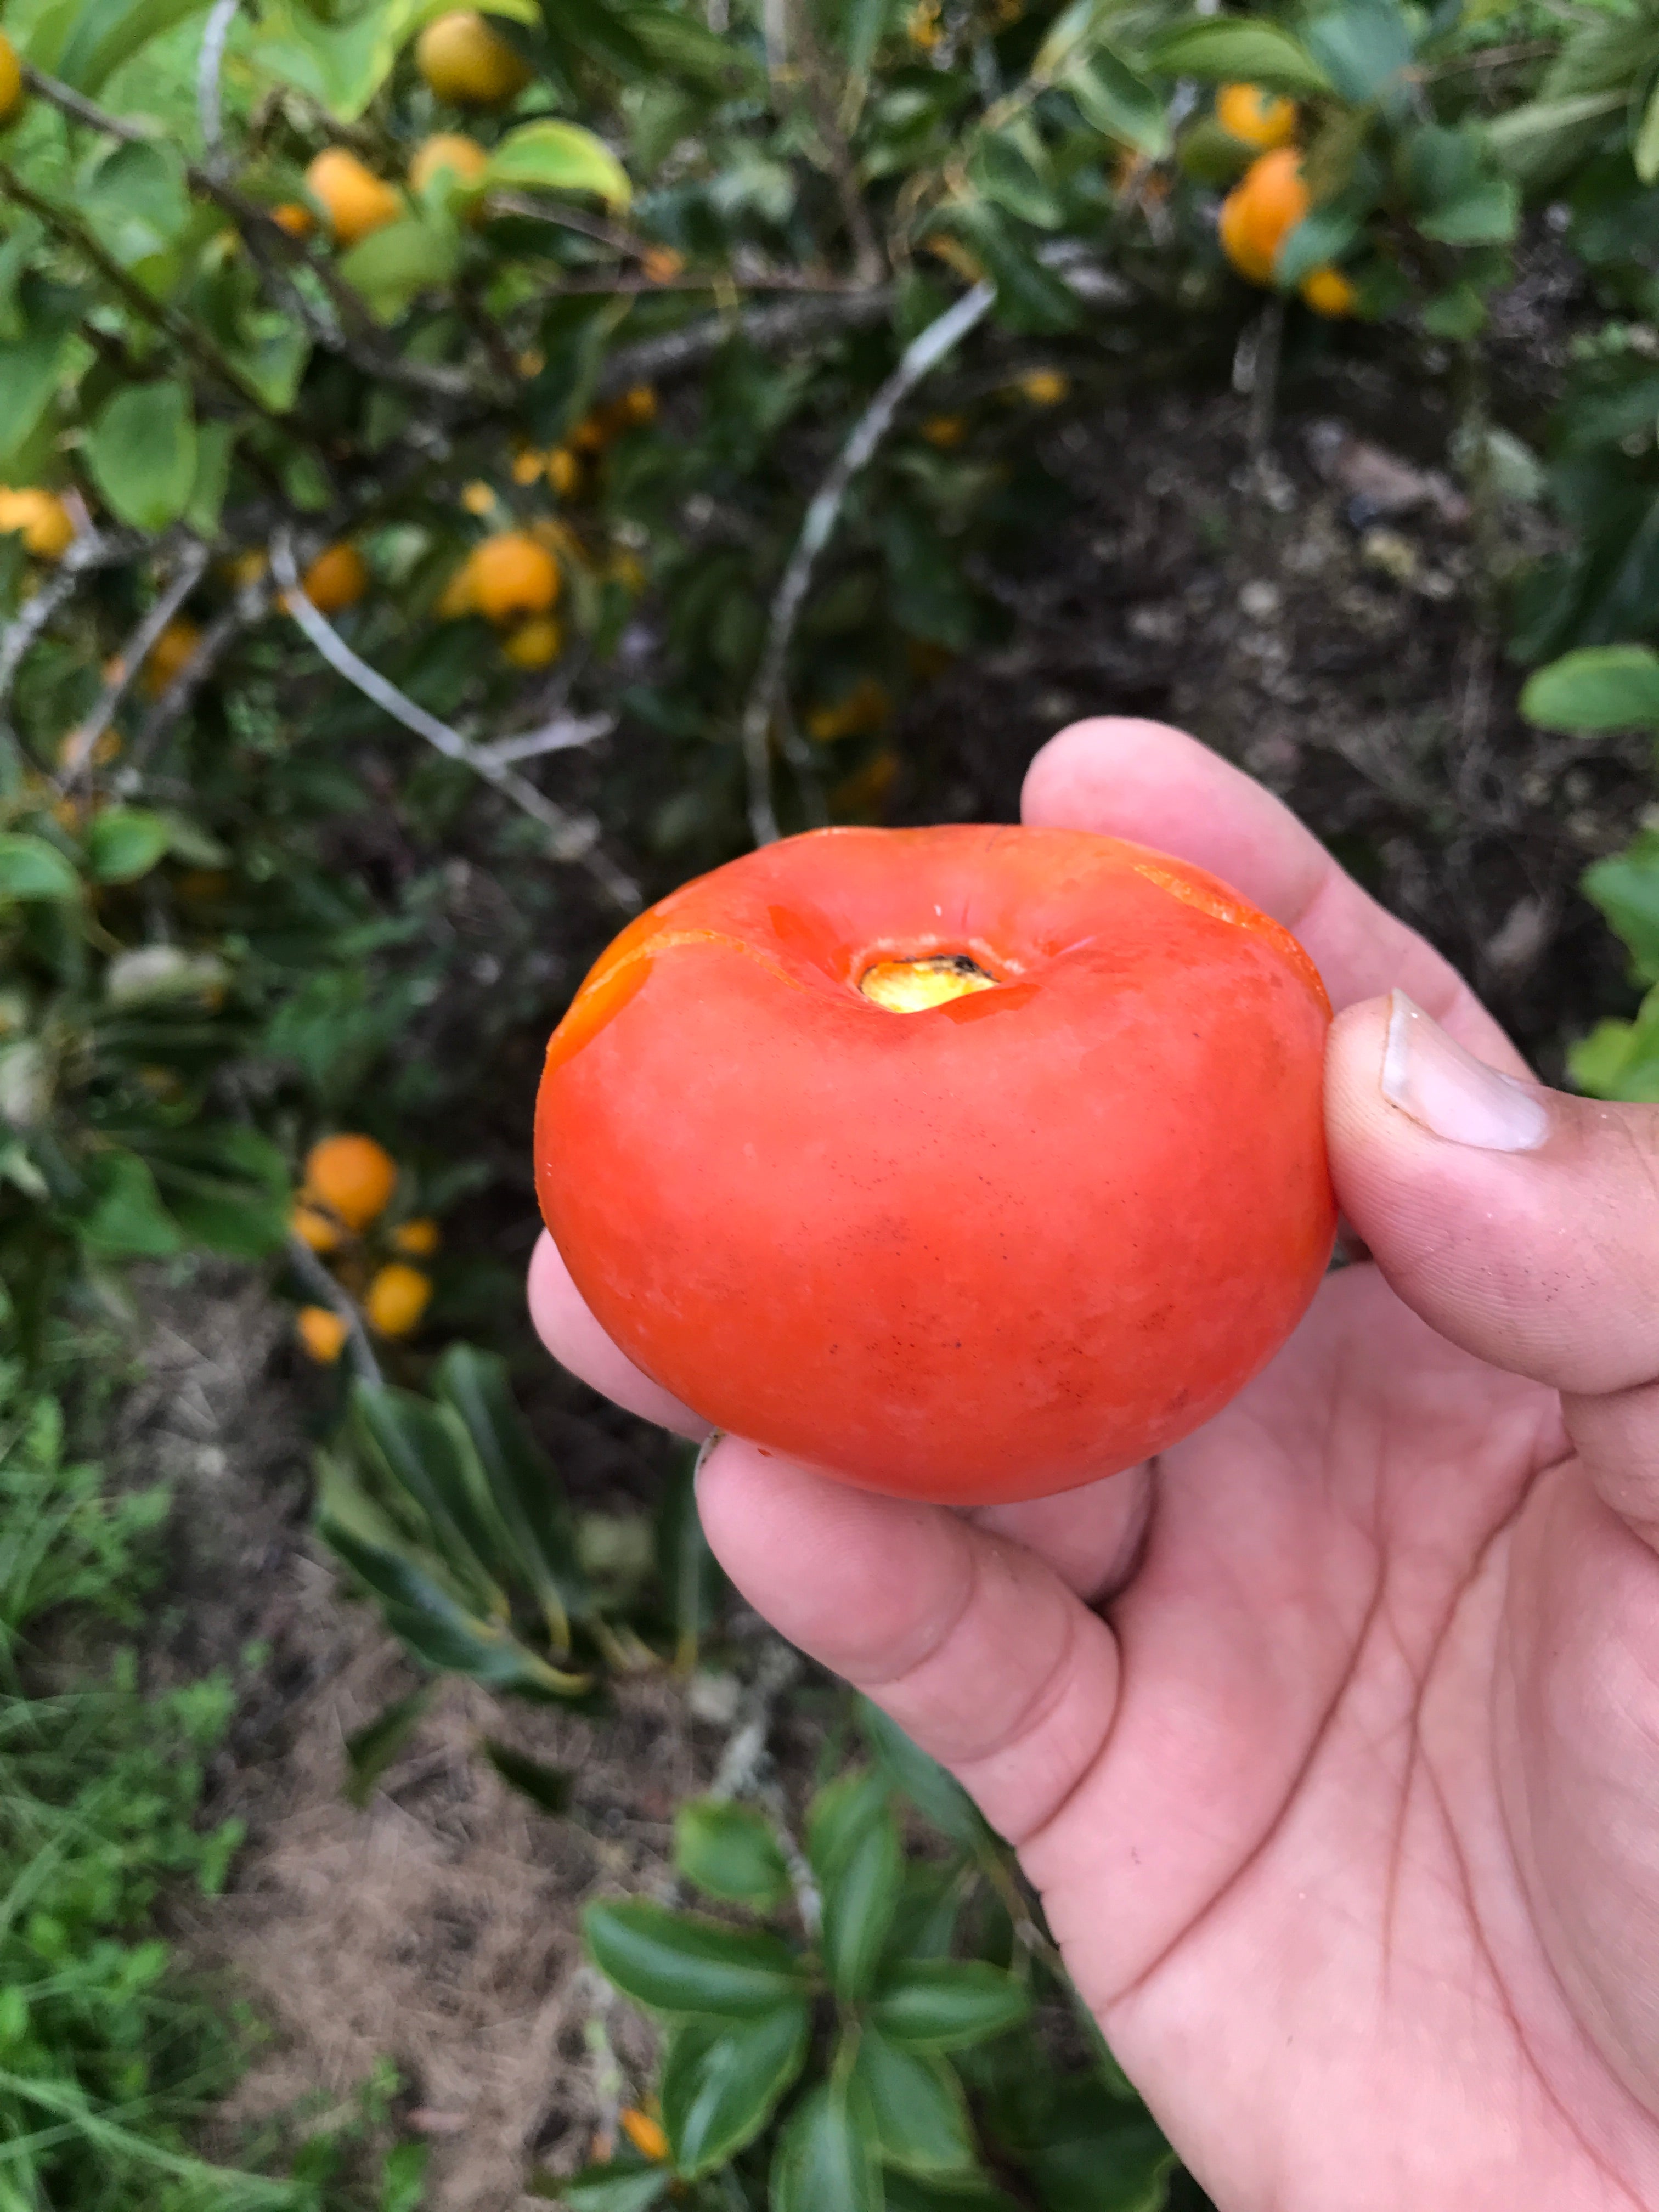 Tropical PERSIMMON “Triumph” cv. (Wait till soft to eat) 5 lb or 10 lb Box (Unfortunately persimmon fruit is on California’s do not ship from Florida list)